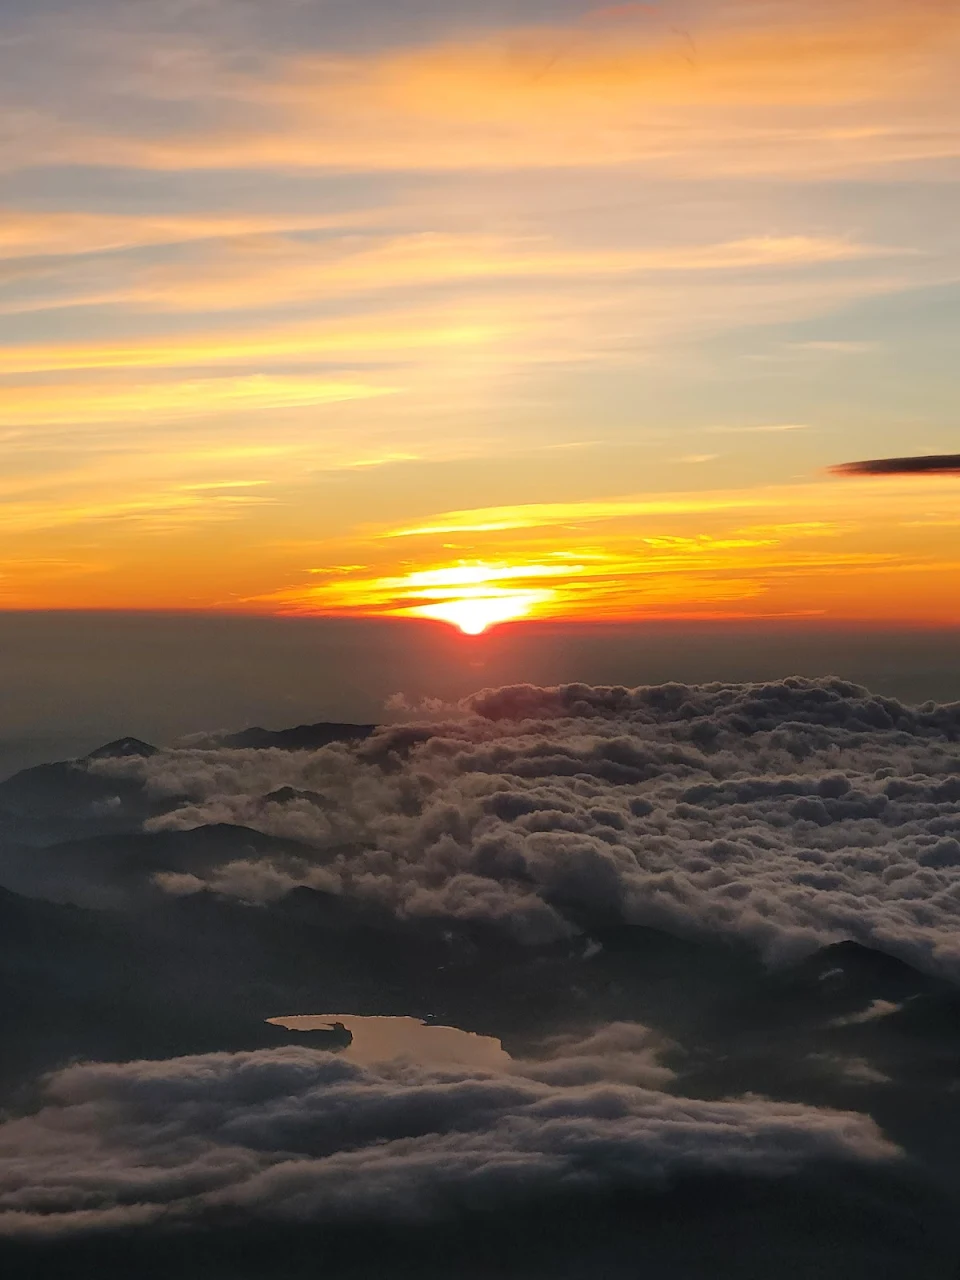 Sunrise from the top of Mt. Fuji